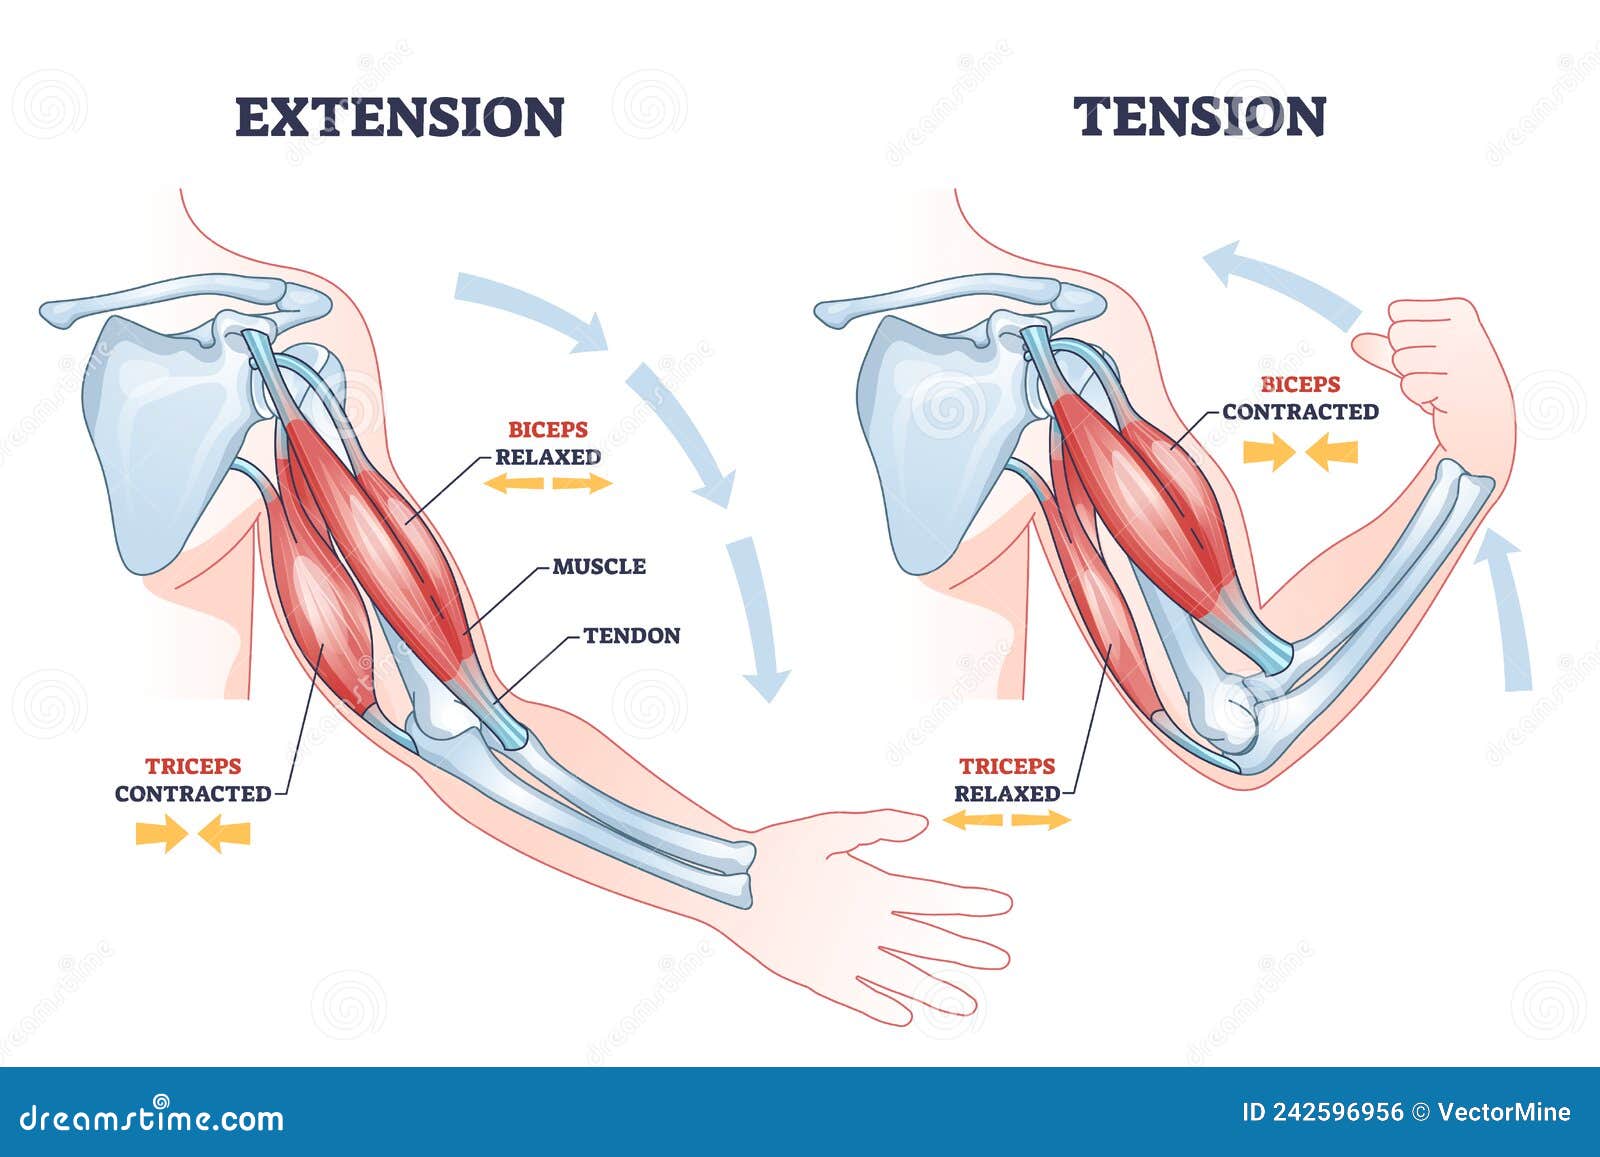 Biceps, Triceps Movement Of The Arm Stock Illustration Illustration Of  Contracted, Bodybuilding: 27882837